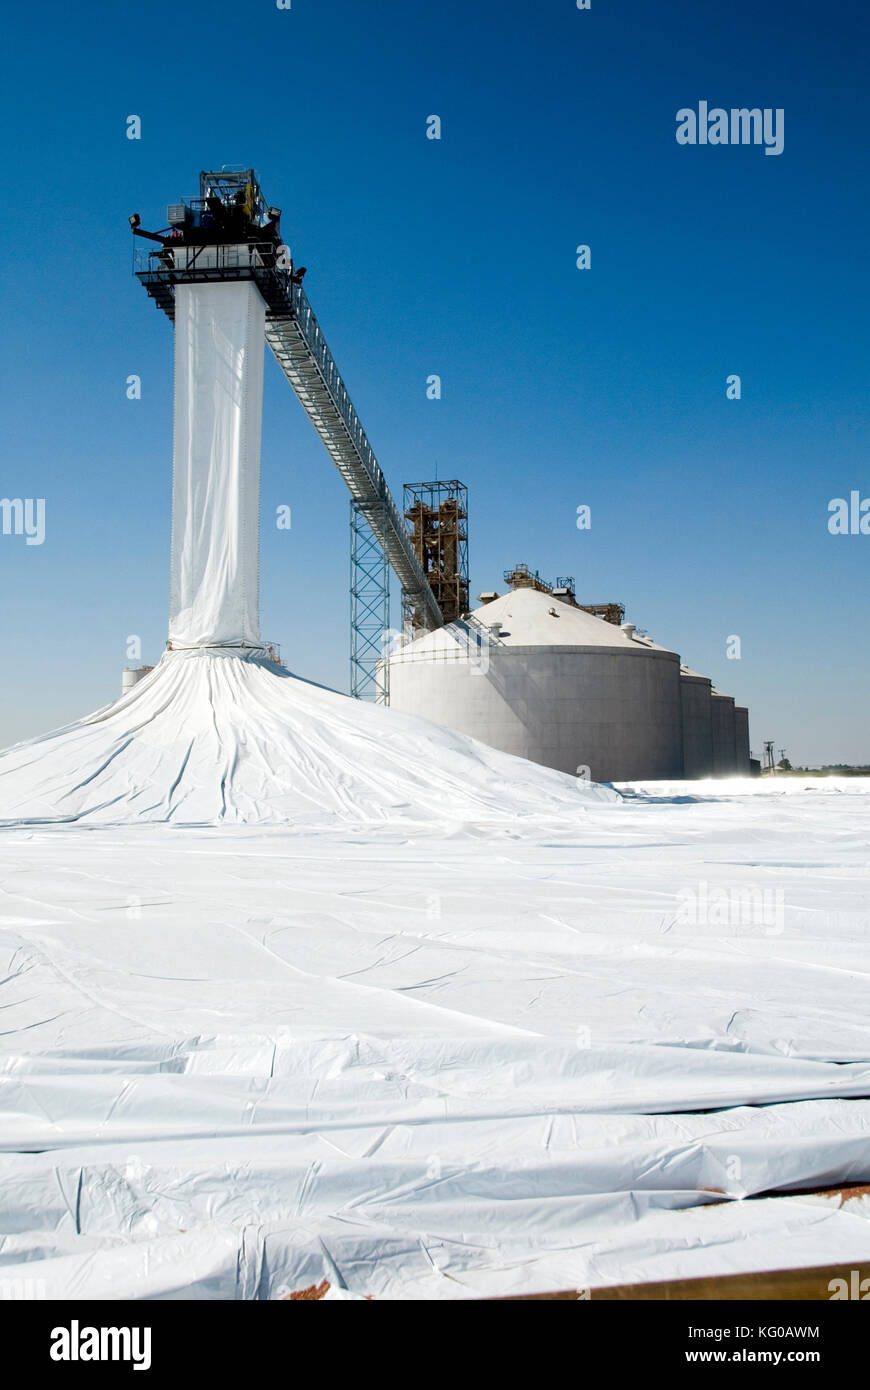 STARTING TO FILL A TEMPORARY GRAIN ELEVATOR. IT USES PLASTIC 90 FEET TALL 350 FEET ACROSS AND HOLDS 2 MILLION BUSHELS Stock Photo